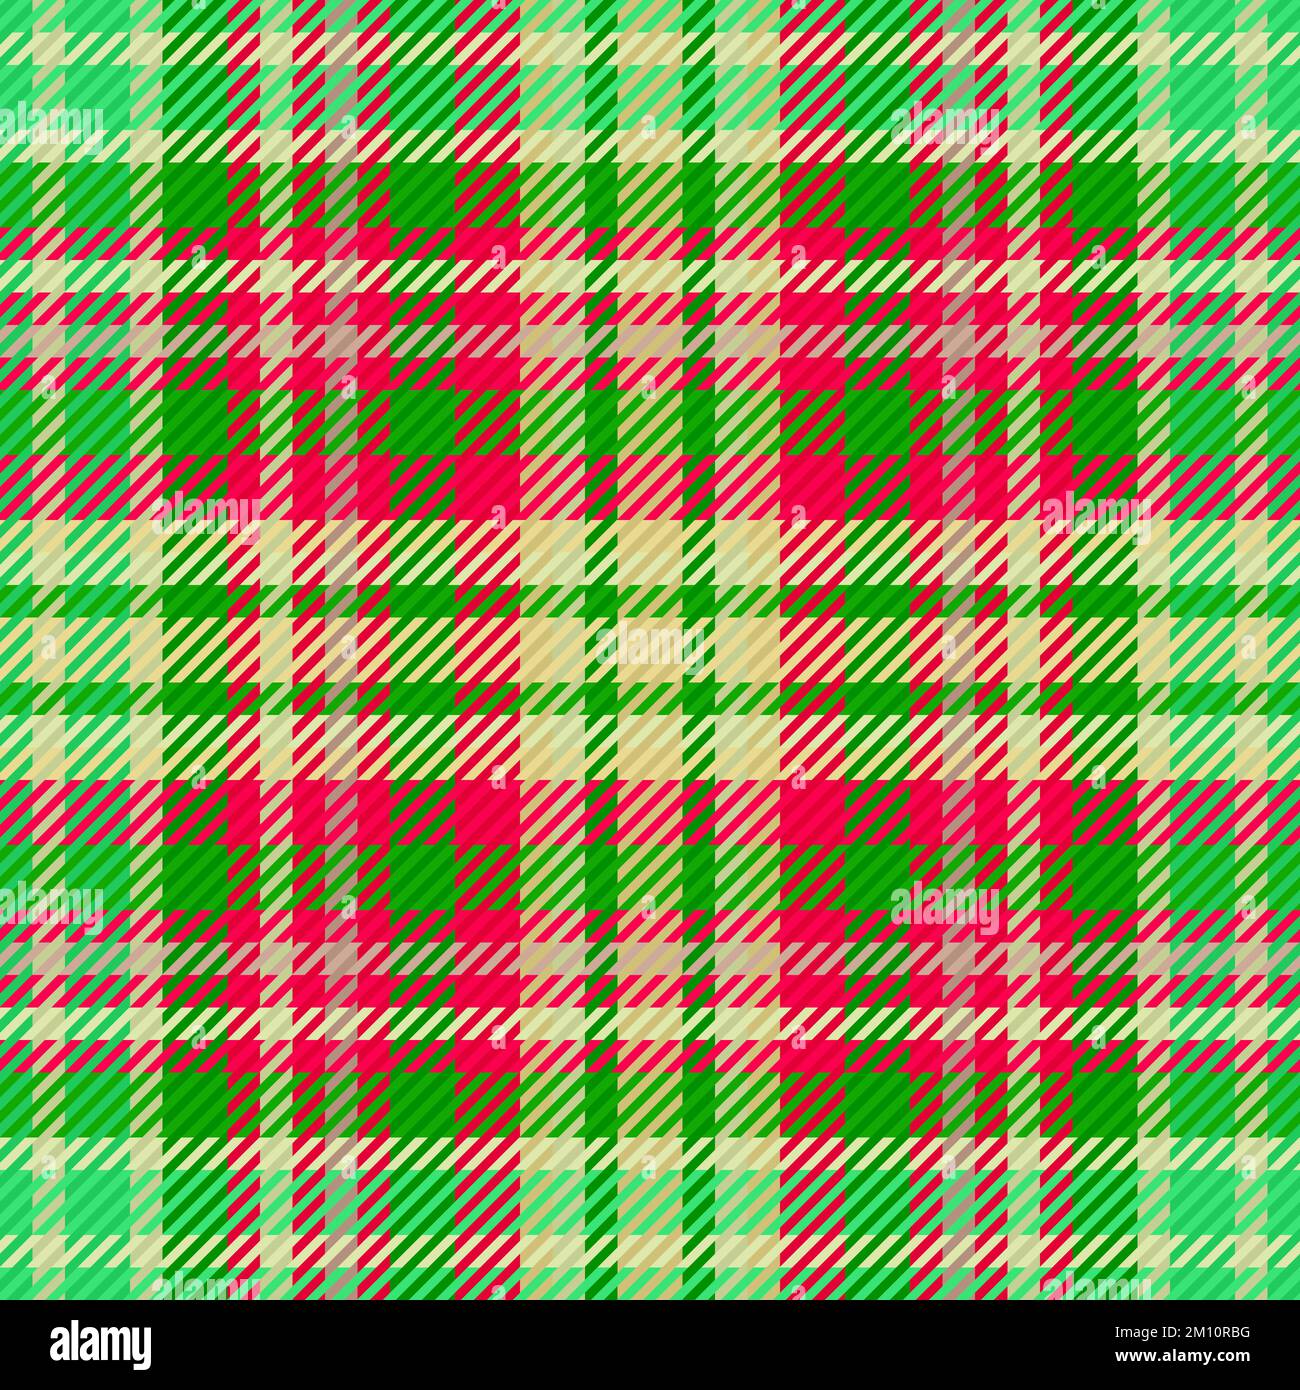 Fabric vector plaid. Background textile pattern. Check seamless texture tartan in green and pastel colors. Stock Vector